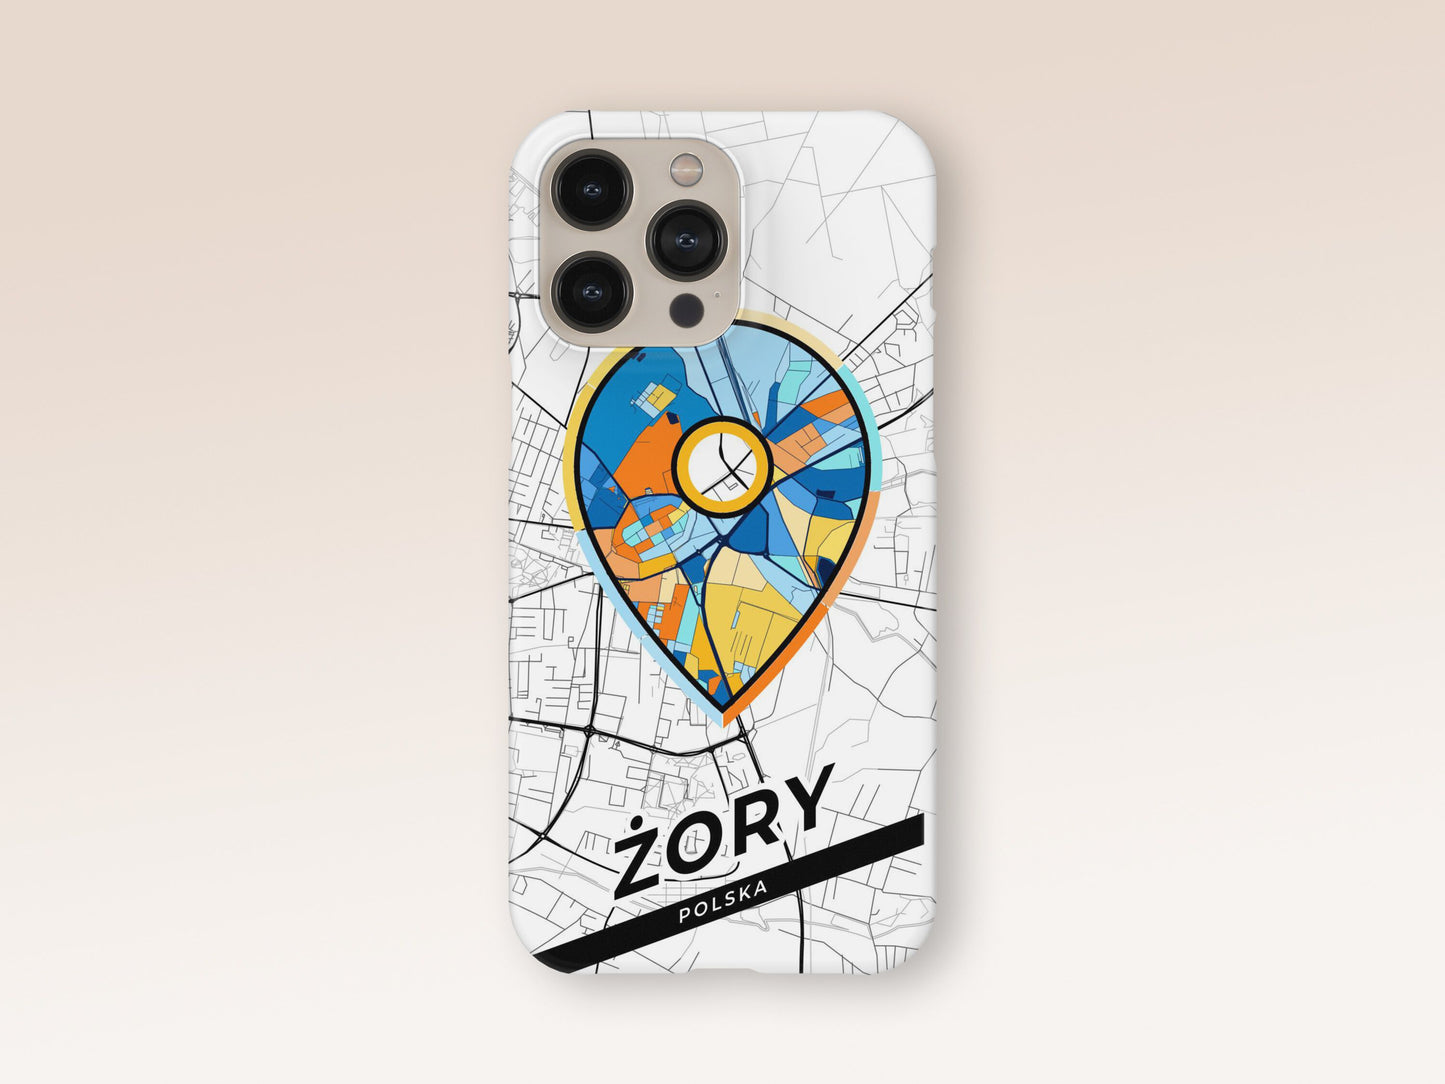 Żory Poland slim phone case with colorful icon 1